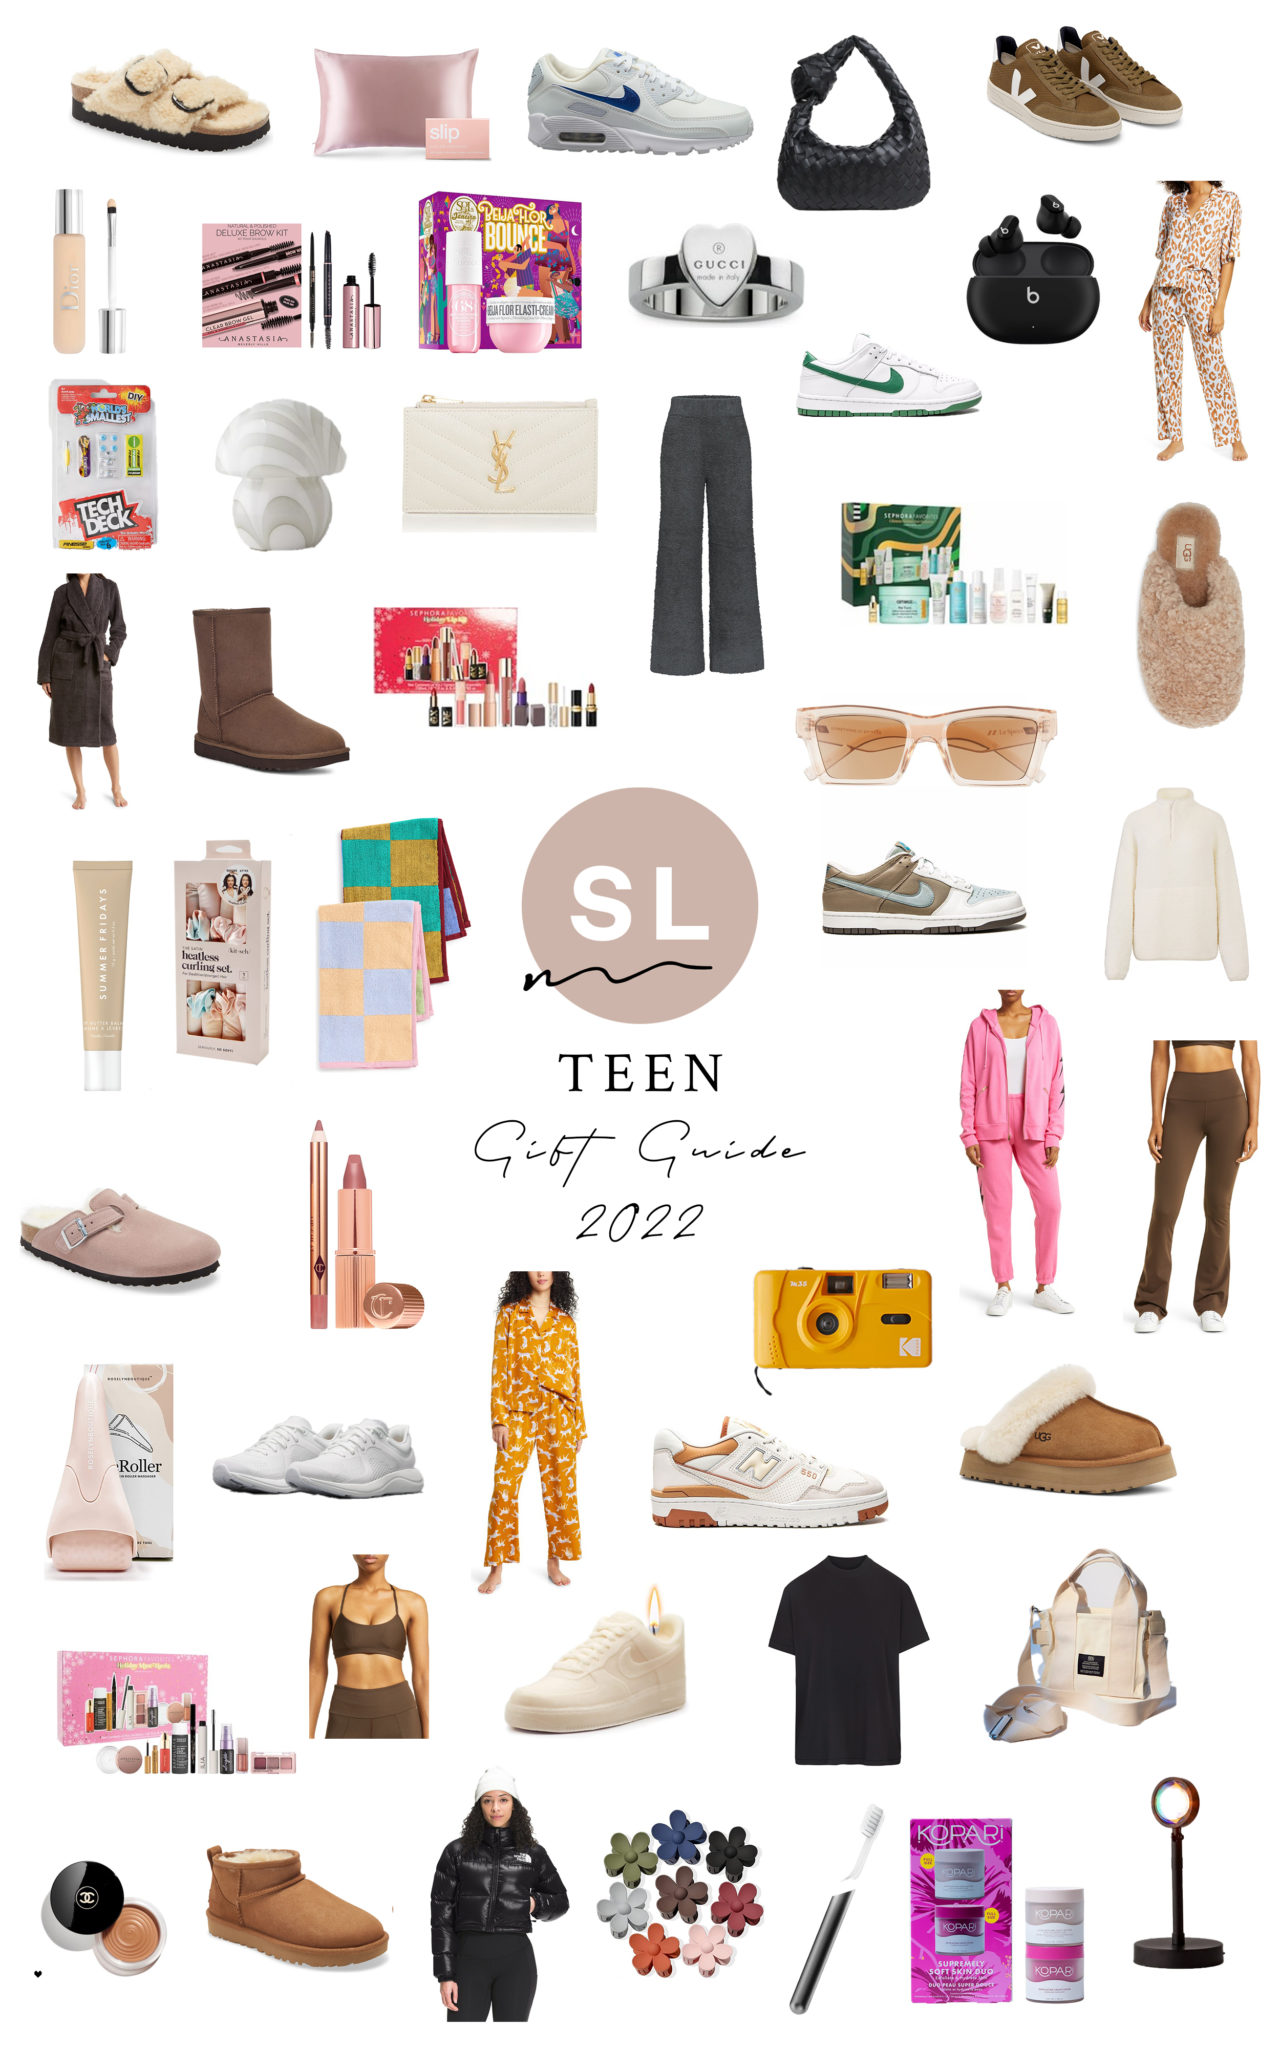 2021 Gift Guide: For Tween Girl - The Sommer Home